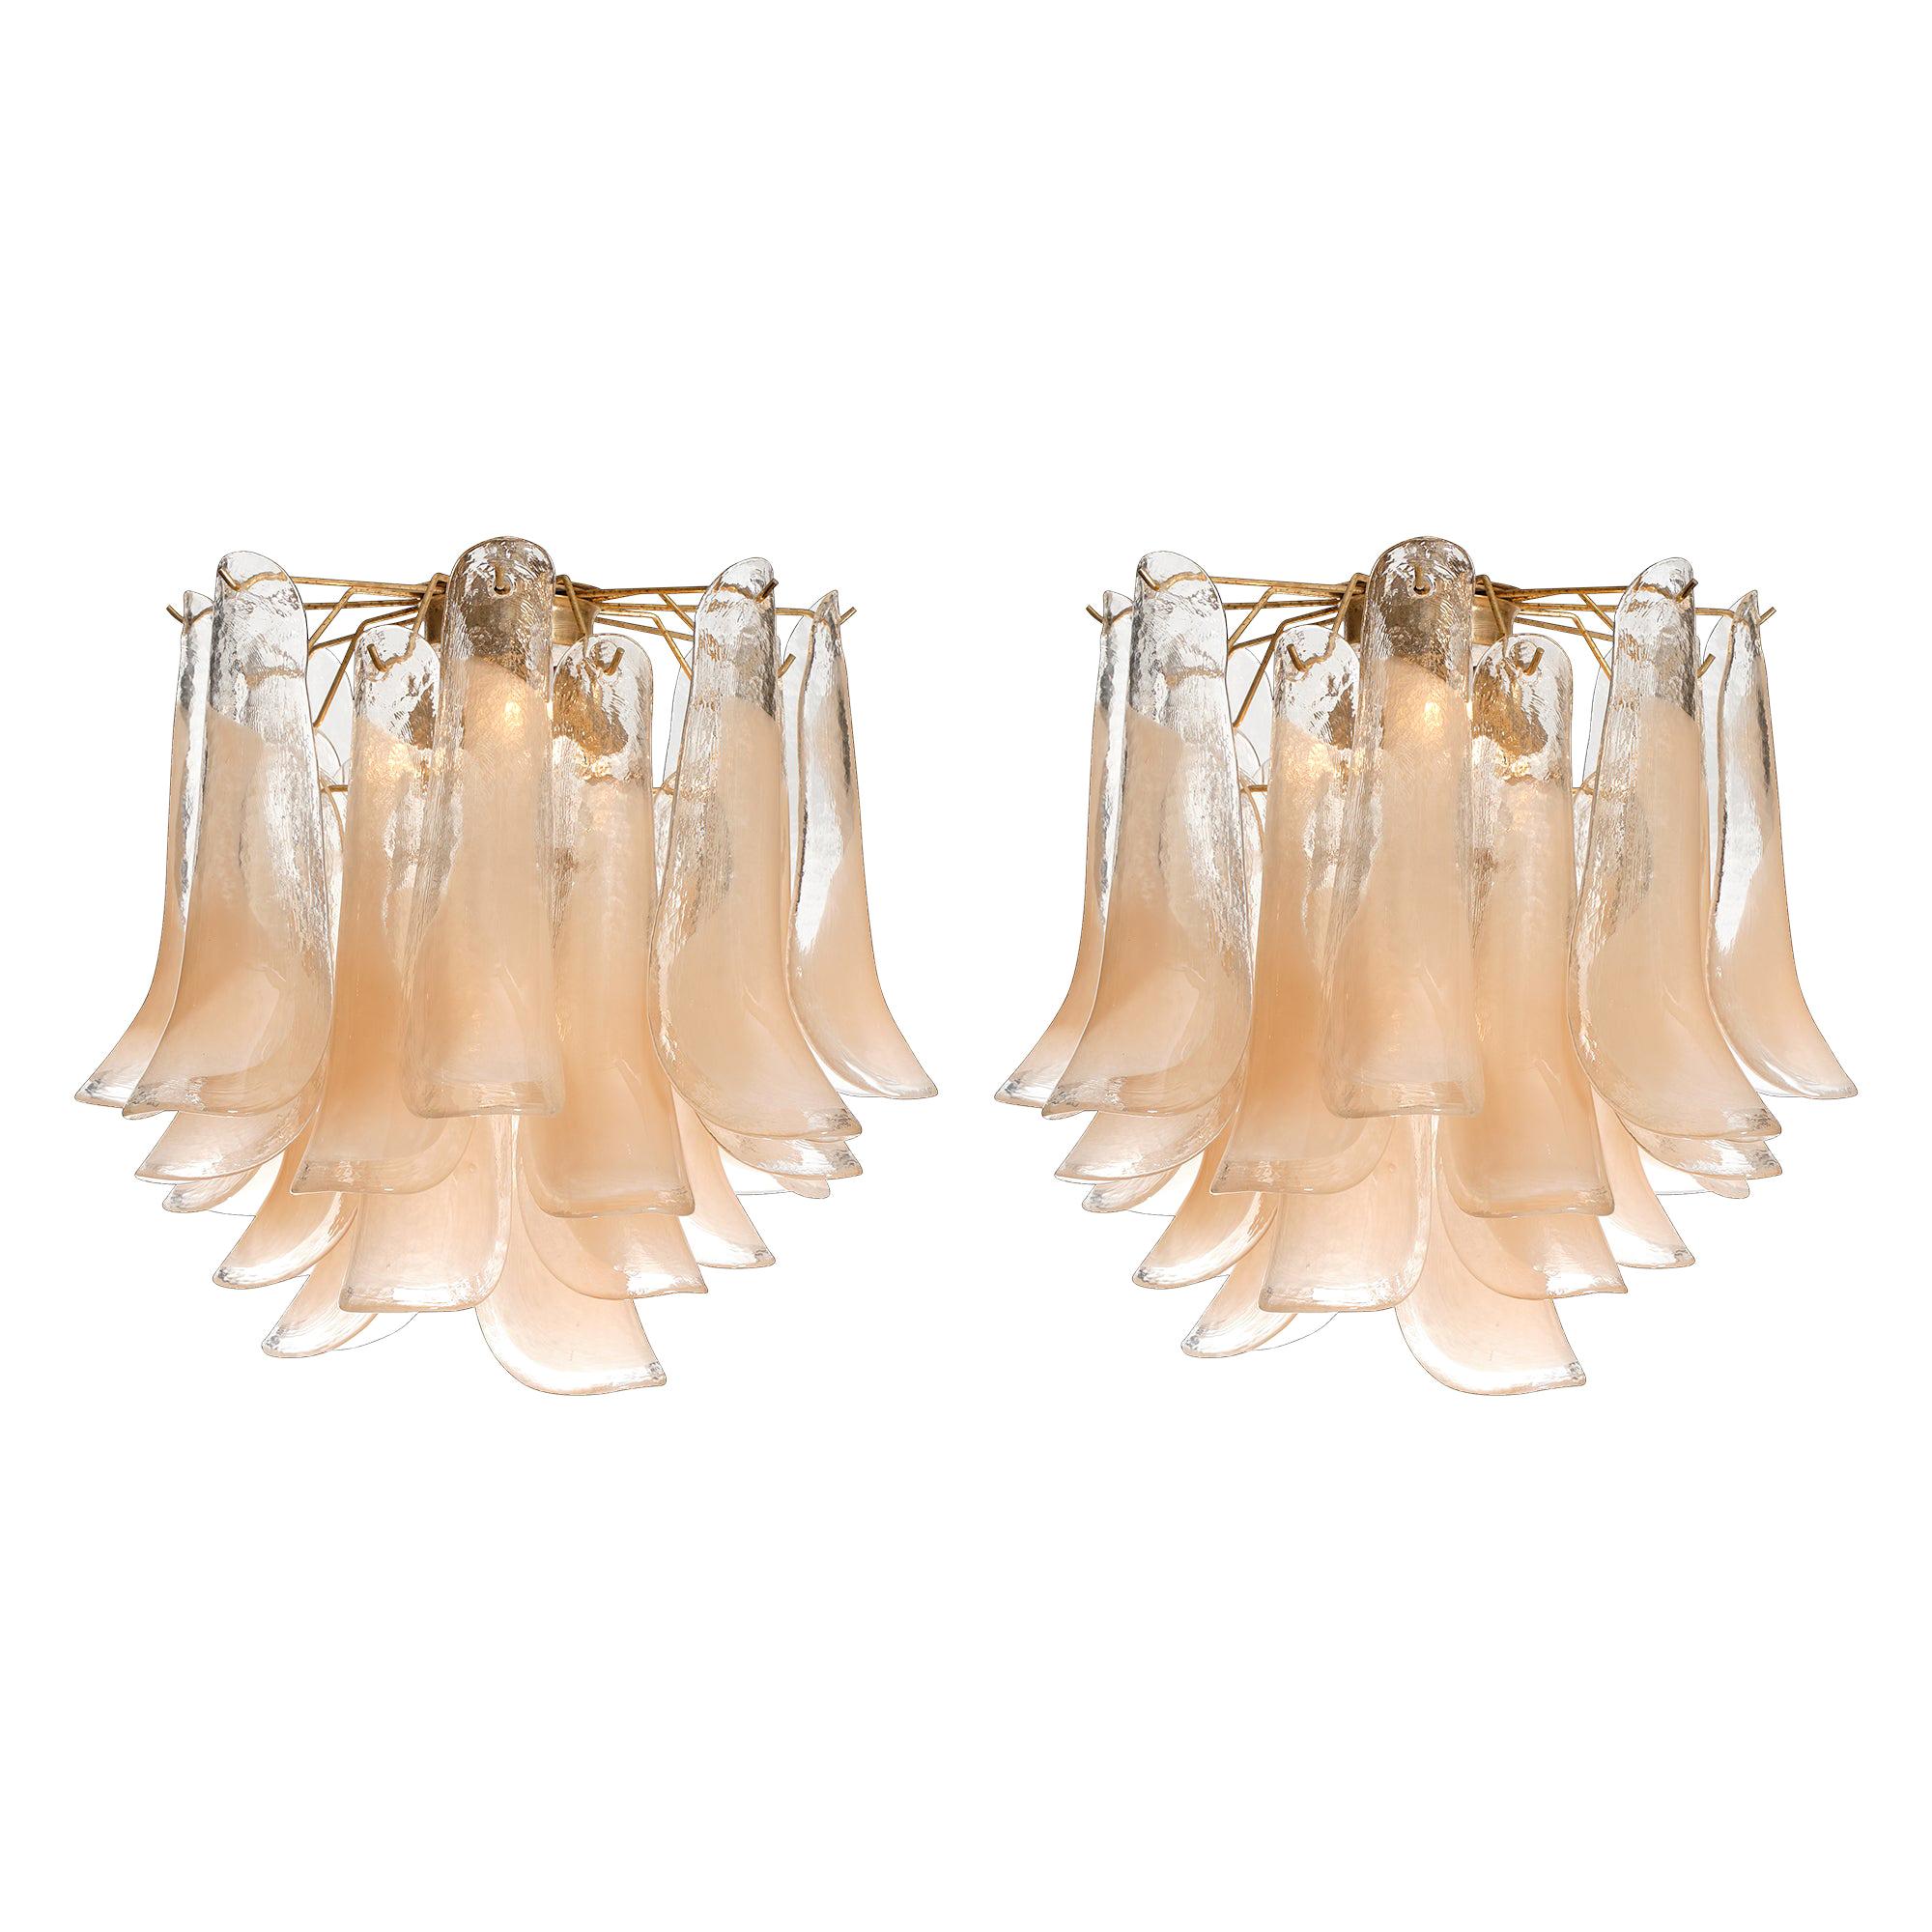 Peach Murano Glass “Selle” Chandeliers